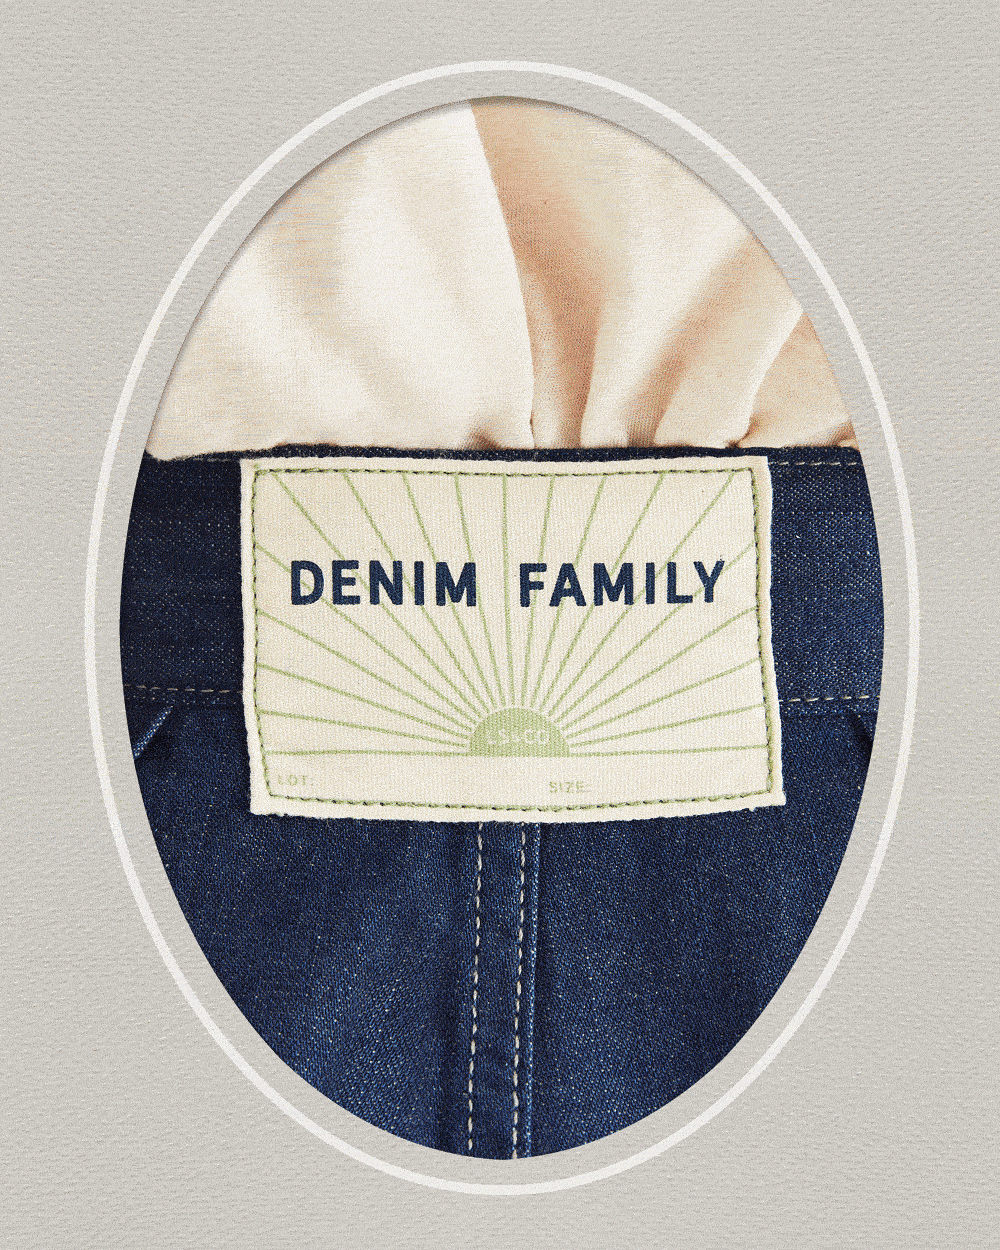 Levi's The Denim Family Collection - Levi's Hong Kong